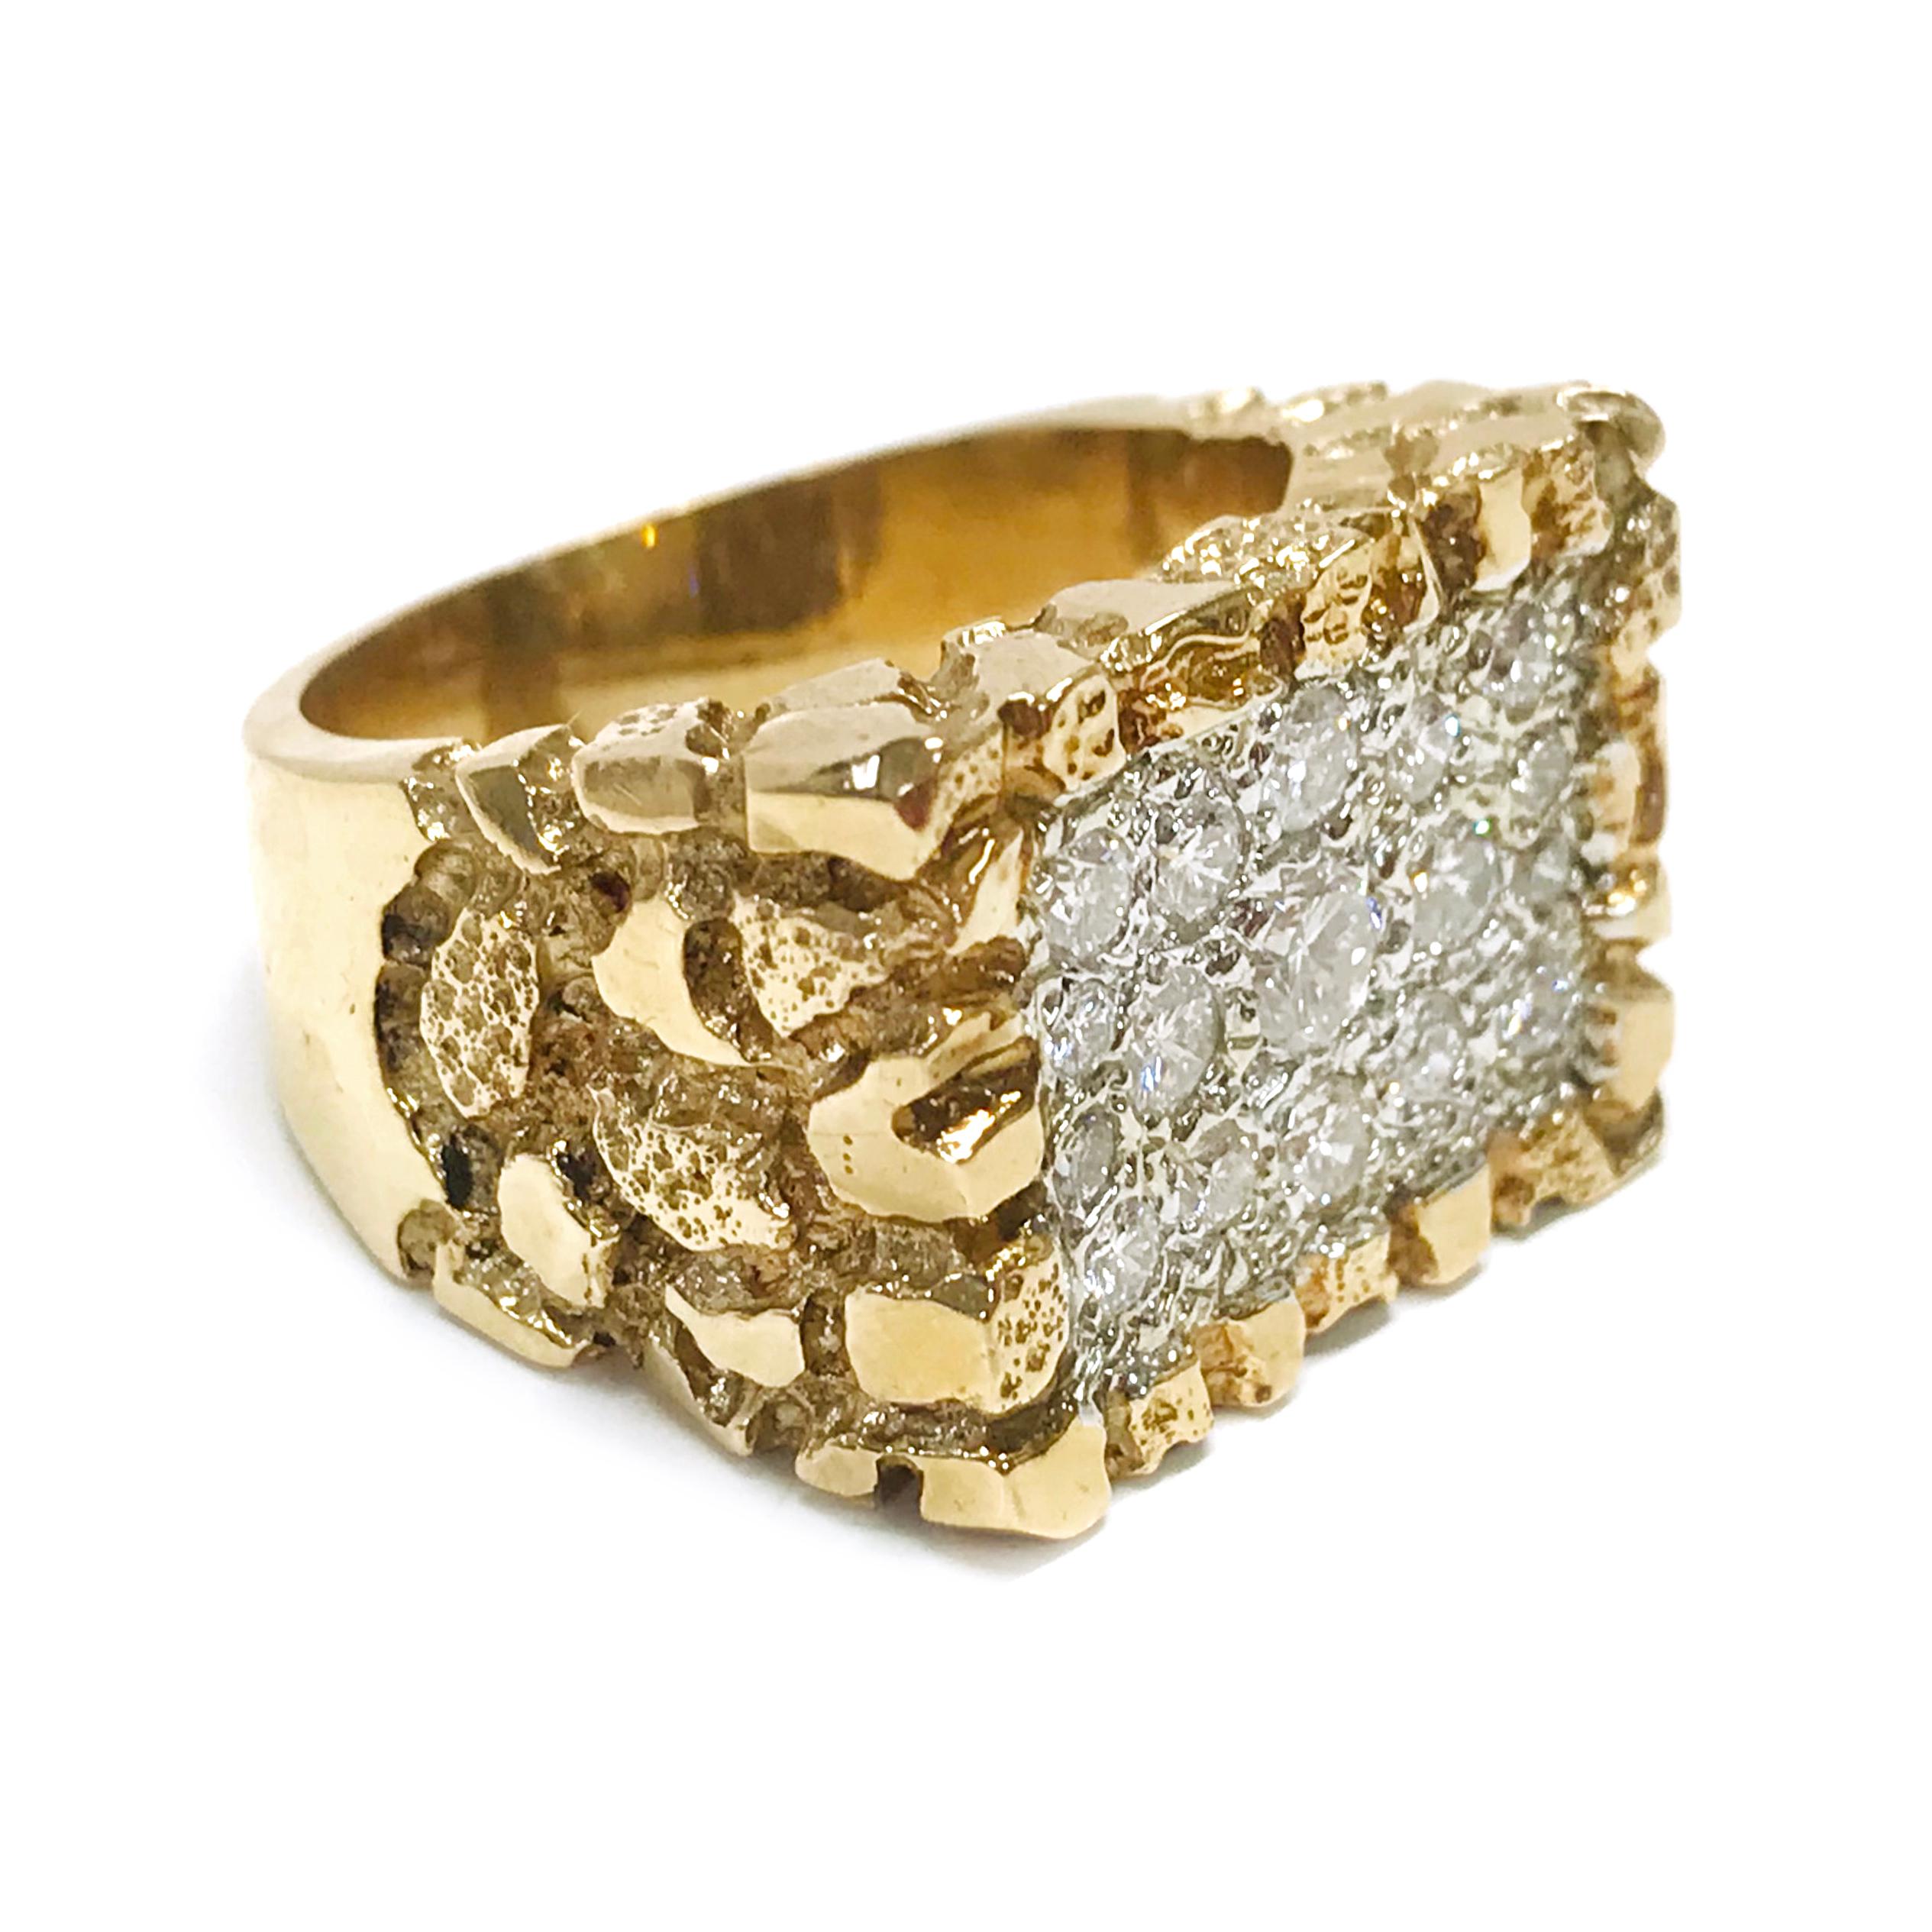 14 Karat Yellow and White Gold Nugget Diamond Ring. The retro look with a smattering of diamonds, approximately half of the ring has a nugget texture and the rest of the wideband tapers with a smooth finish. The square face has seventeen round